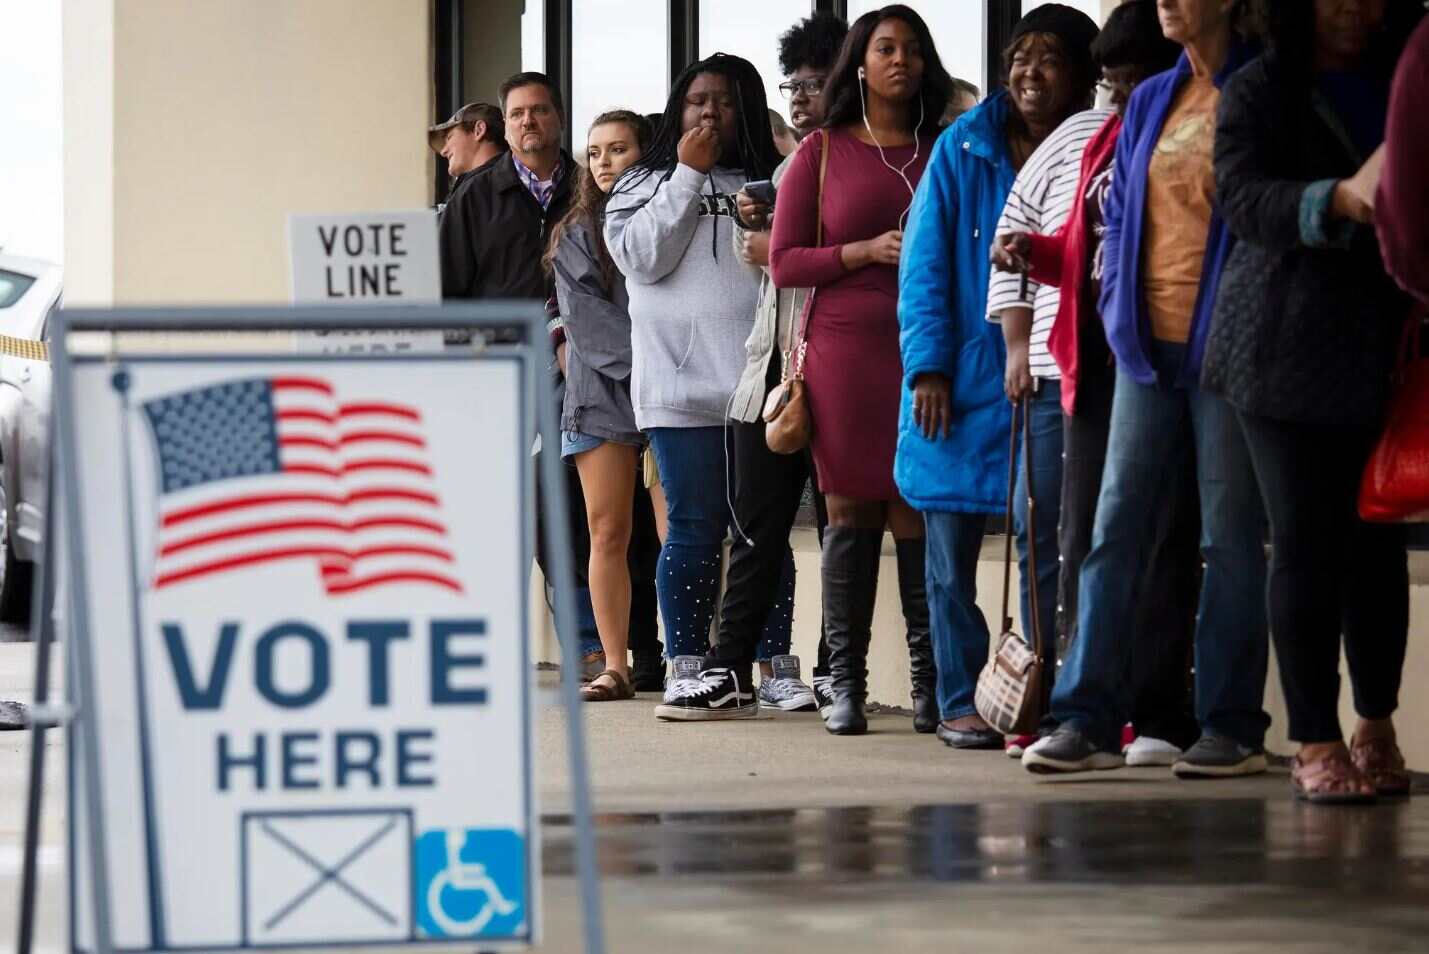 In the case involving Georgia's voting system, a federal judge has ruled against the fair fight action